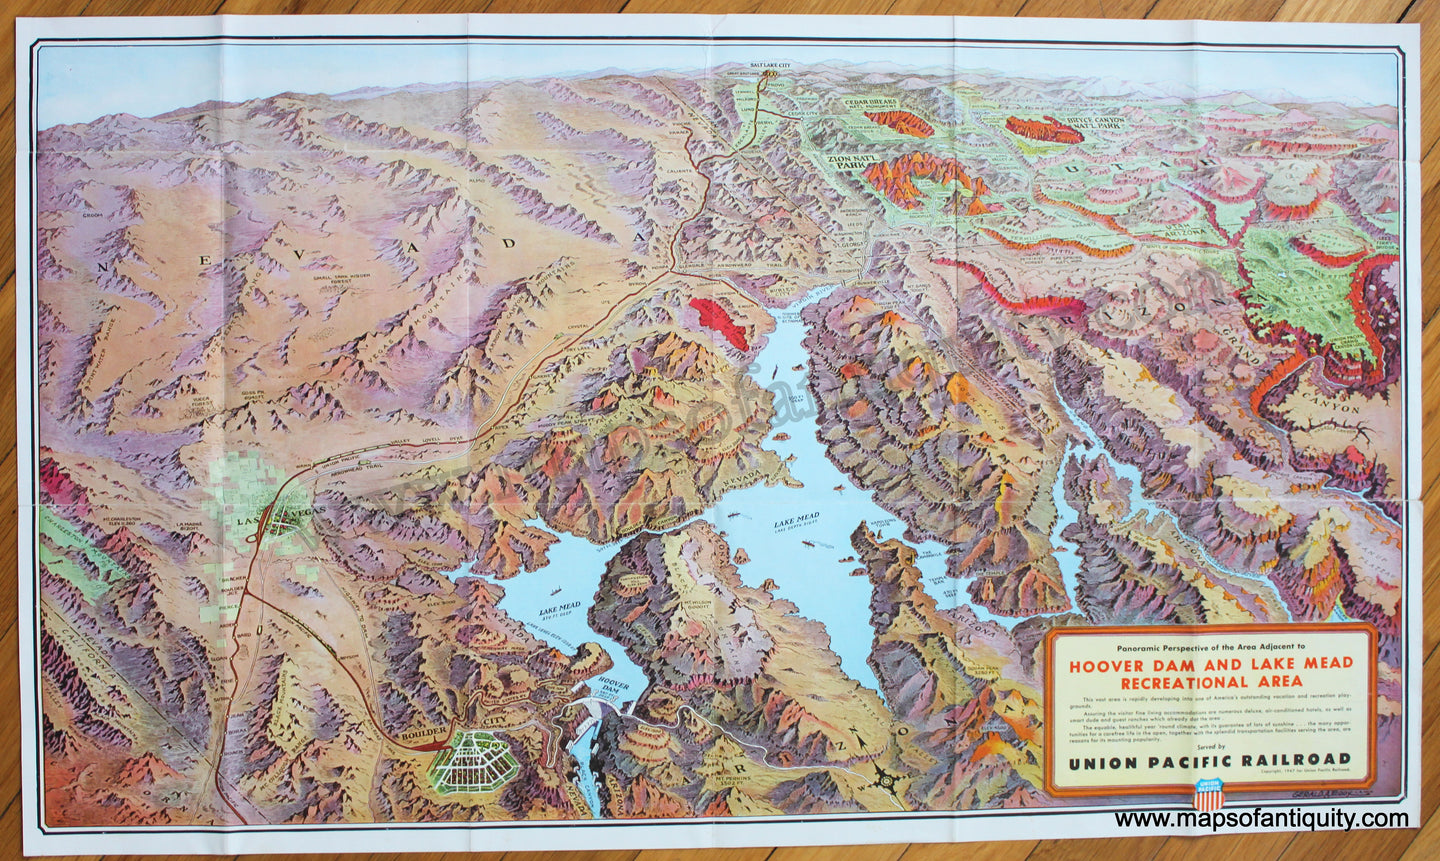 Antique-Printed-Color-Bird's-Eye-View-Map-Panoramic-Perspective-of-the-Area-Adjacent-to-Hoover-Dam-and-Lake-Mead-Recreational-Area-1947-Gerald-A.-Eddy-Union-Pacific-Railroad-West-1940s-1900s-20th-century-Maps-of-Antiquity